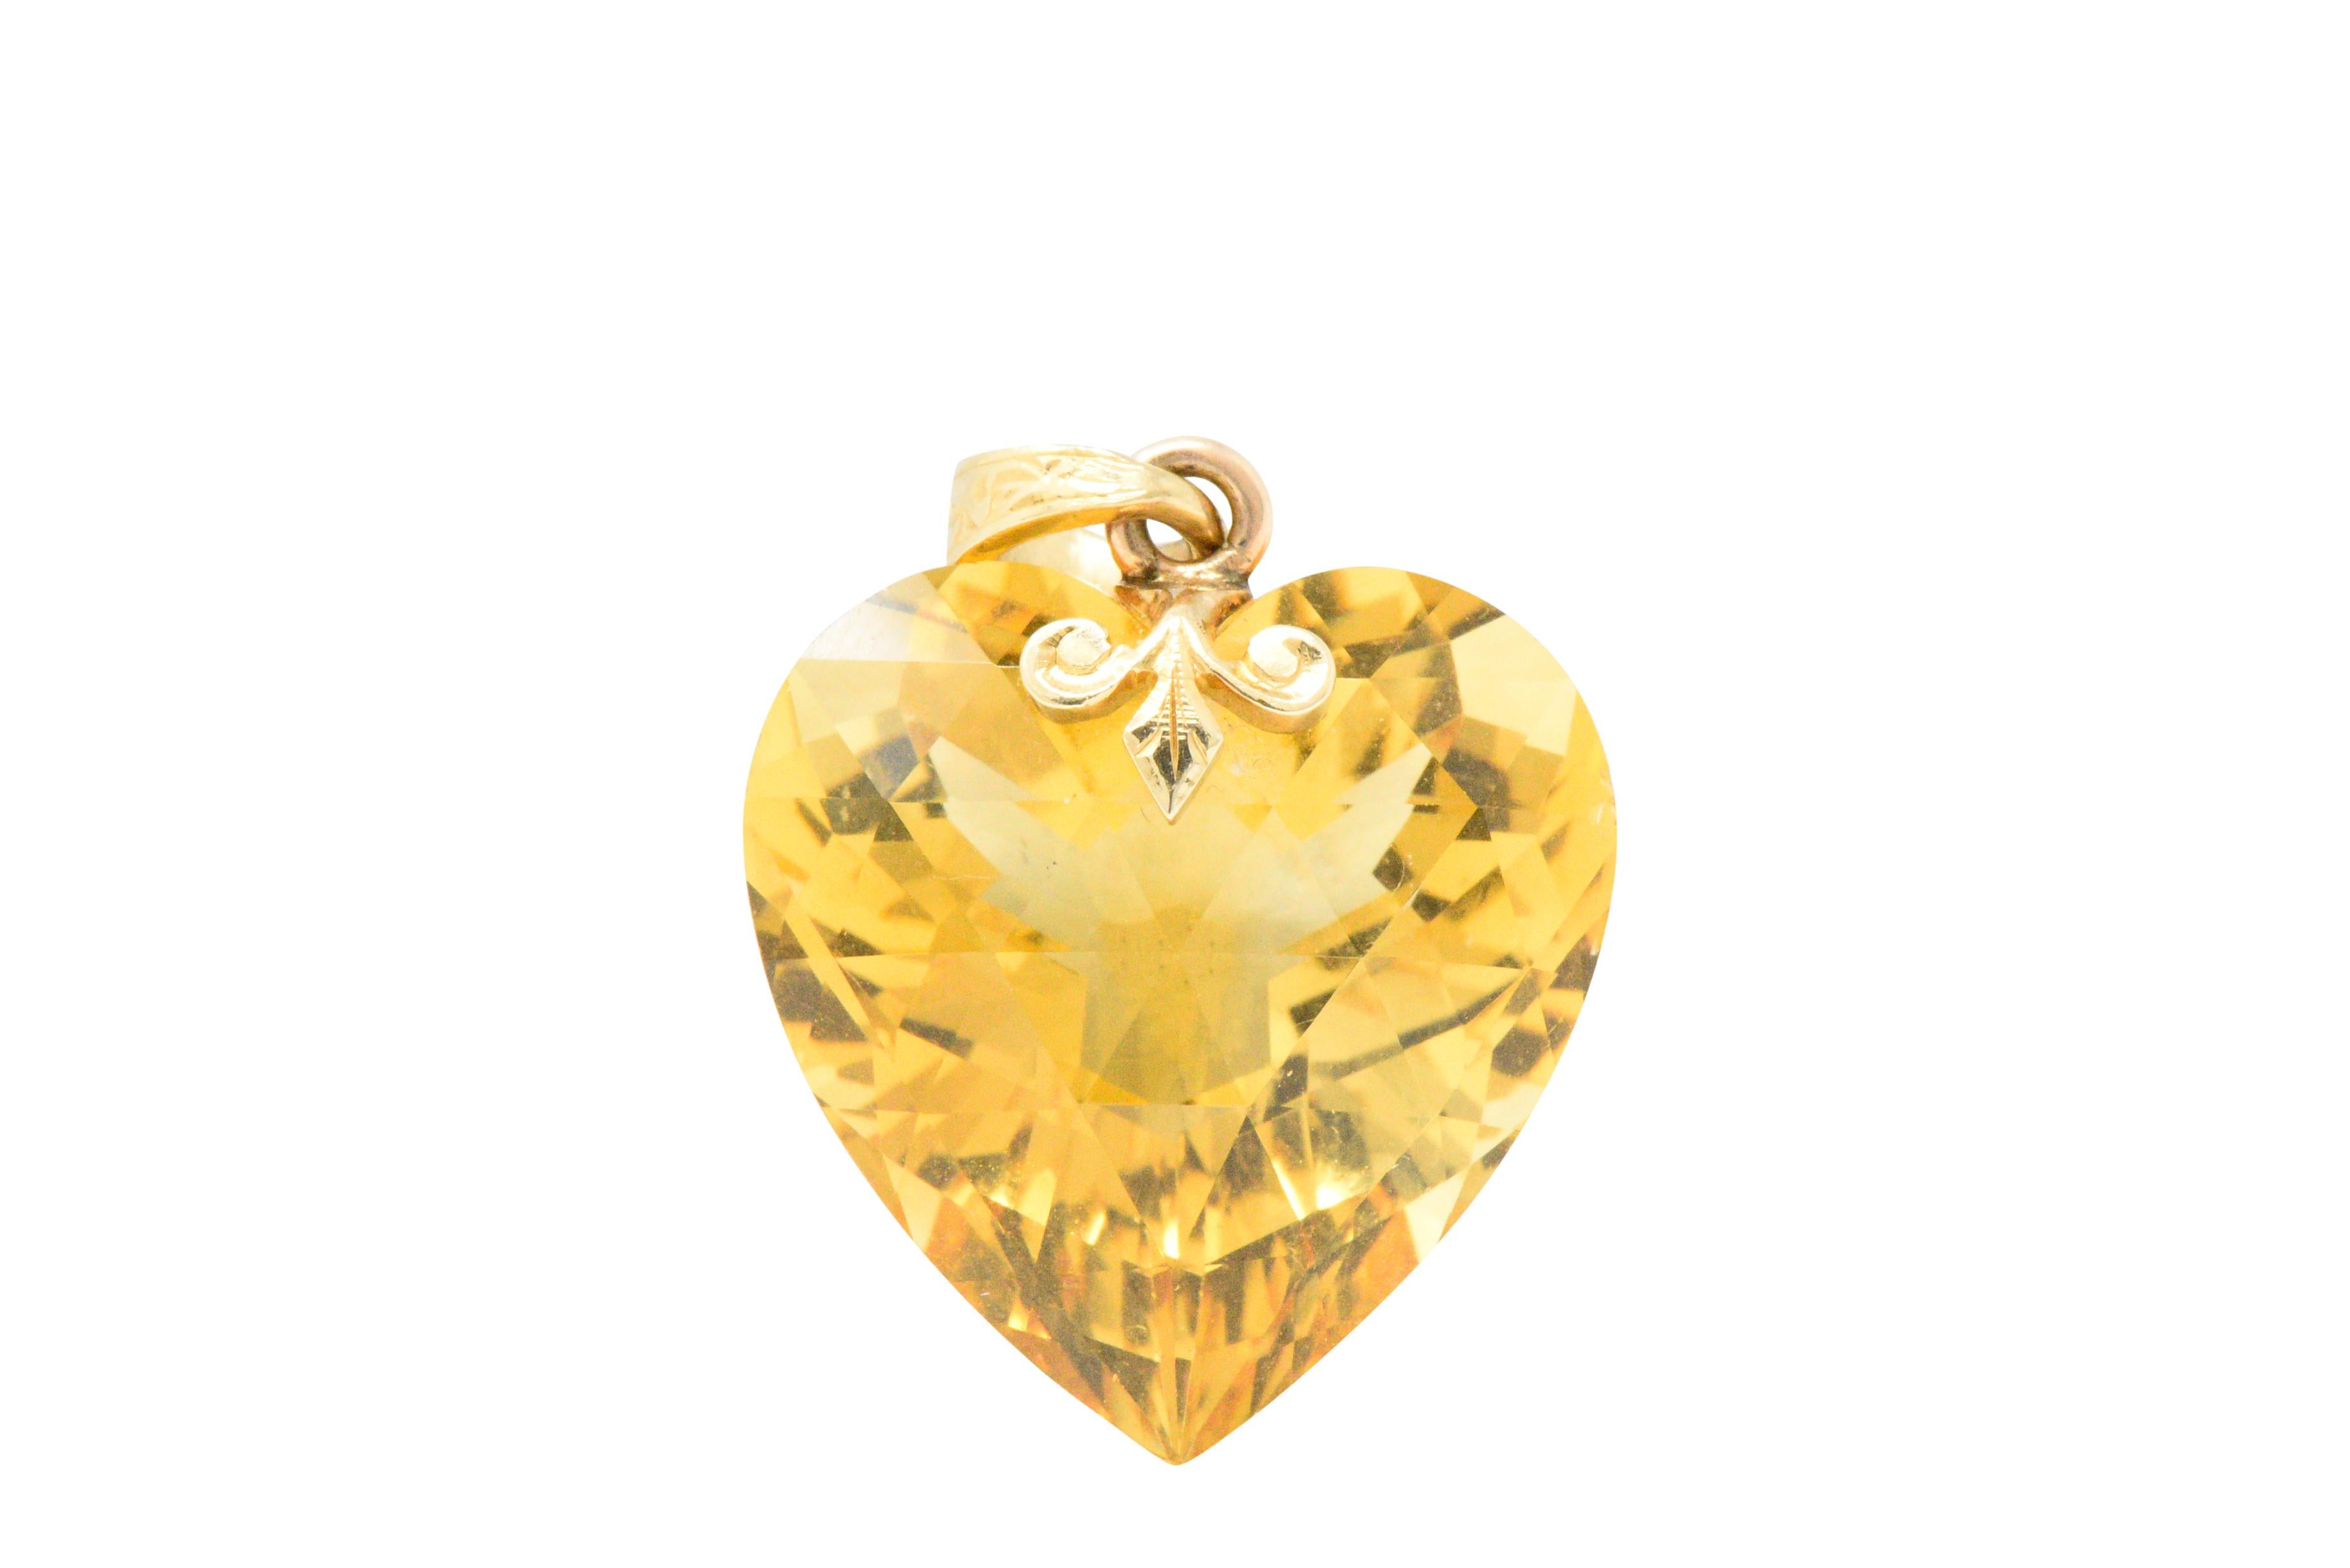 Art Nouveau rose cut citrine weighing approximately 29.57 carats (with bale), bright sunny yellow even color

With a engraved scrolling and almost a fleur-de-lis bale

Bale signed B B & B and numbered 33463

Total Length: Approx. 1 inch

Total